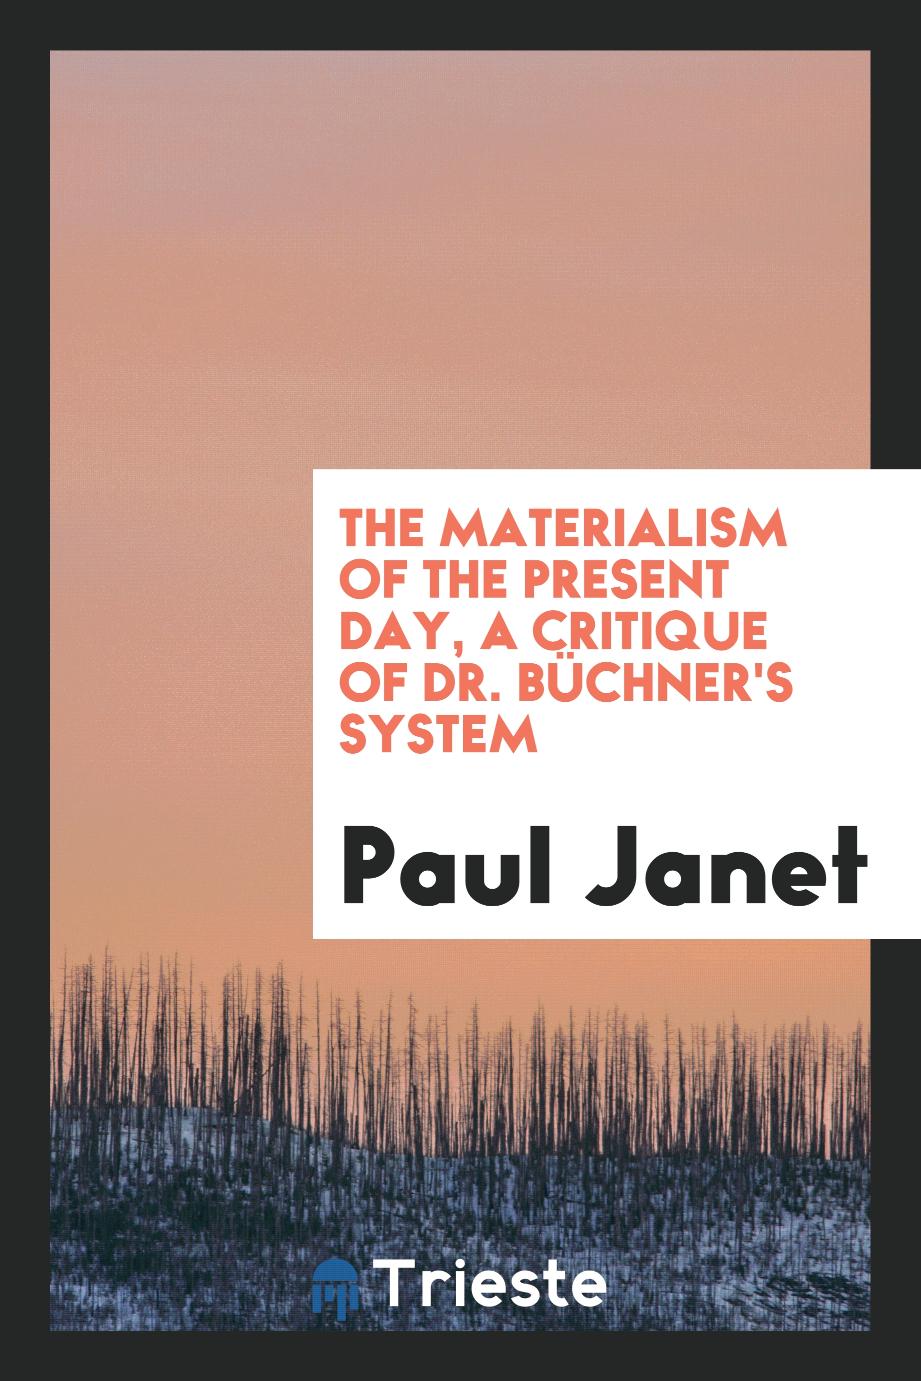 The materialism of the present day, a critique of Dr. Büchner's system